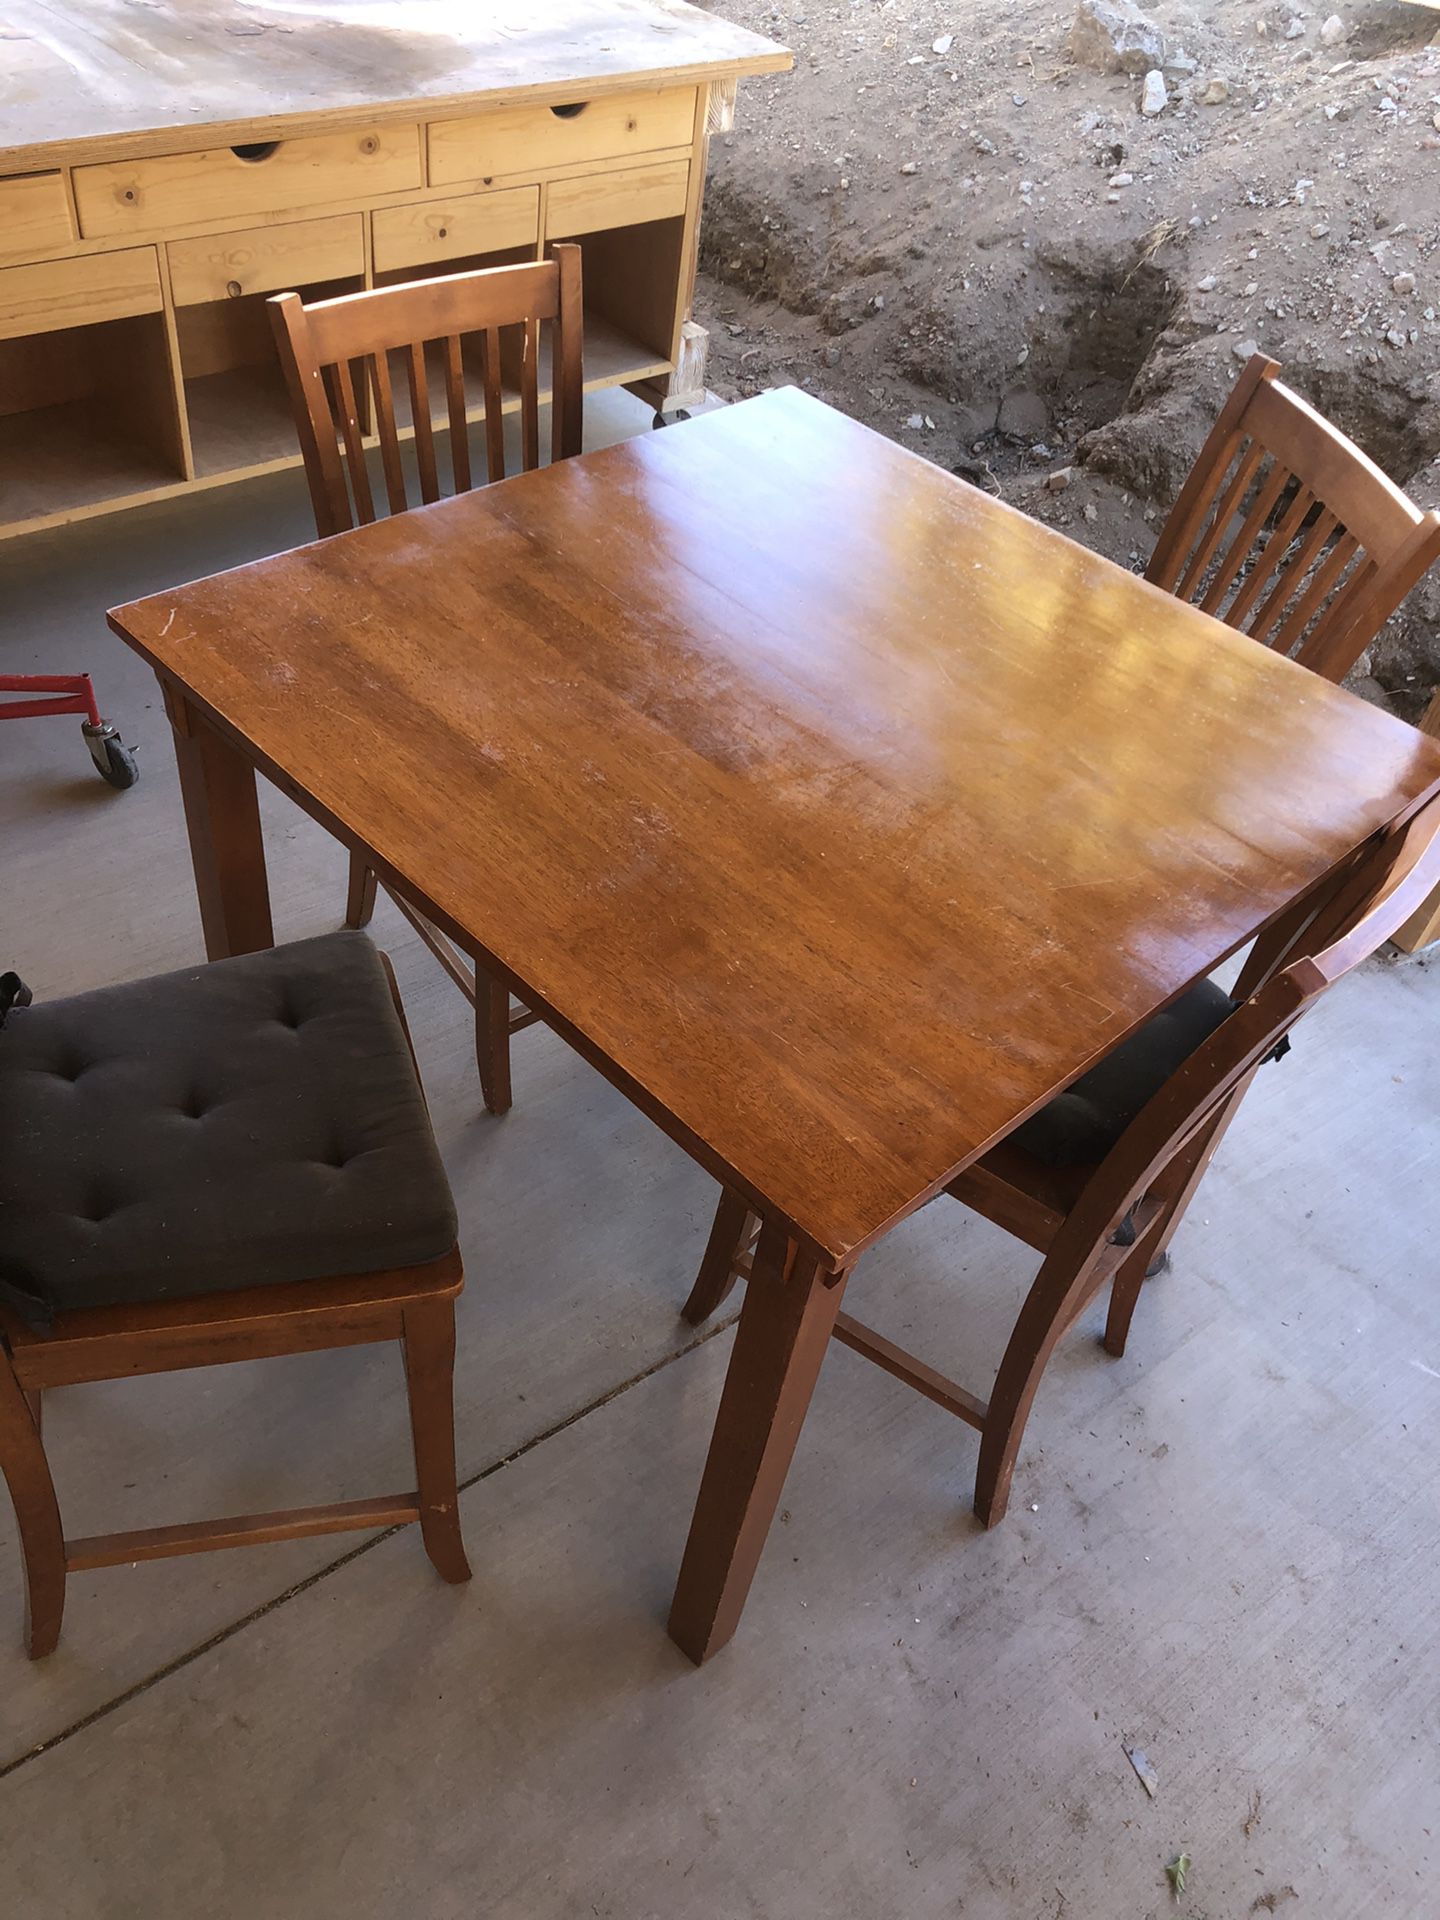 Kitchen or Dining Room tall table with 4 tall chairs